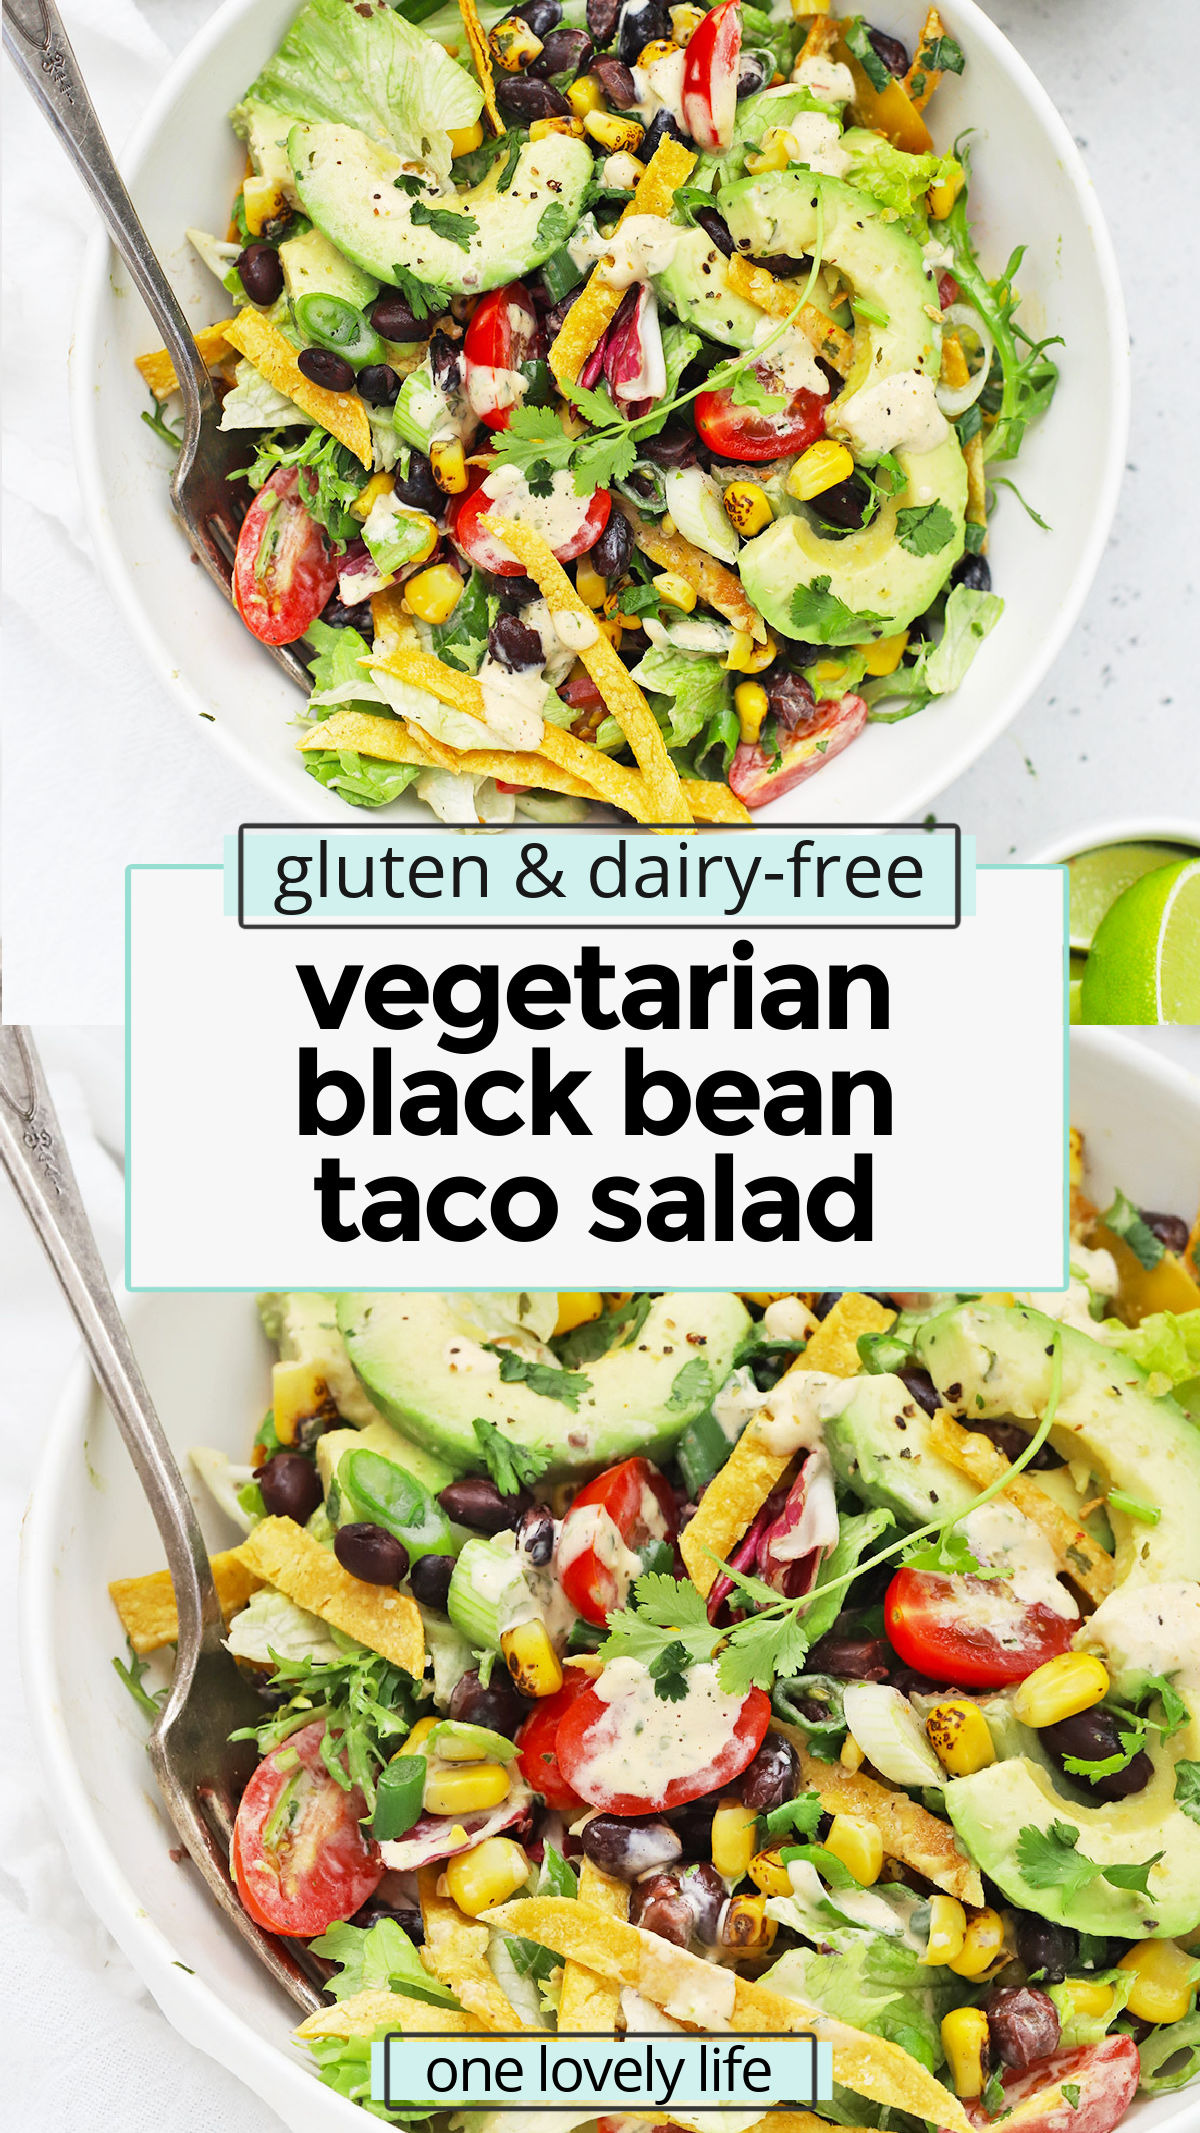 Black Bean Taco Salad - A gorgeous vegetarian taco salad with colorful veggies and a creamy dressing that'll keep you coming back for more! (Gluten-Free, Vegan-Friendly) // Vegan Taco Salad // Meatless Monday // Vegan Dinner // Healthy Dinner // Vegetarian Dinner